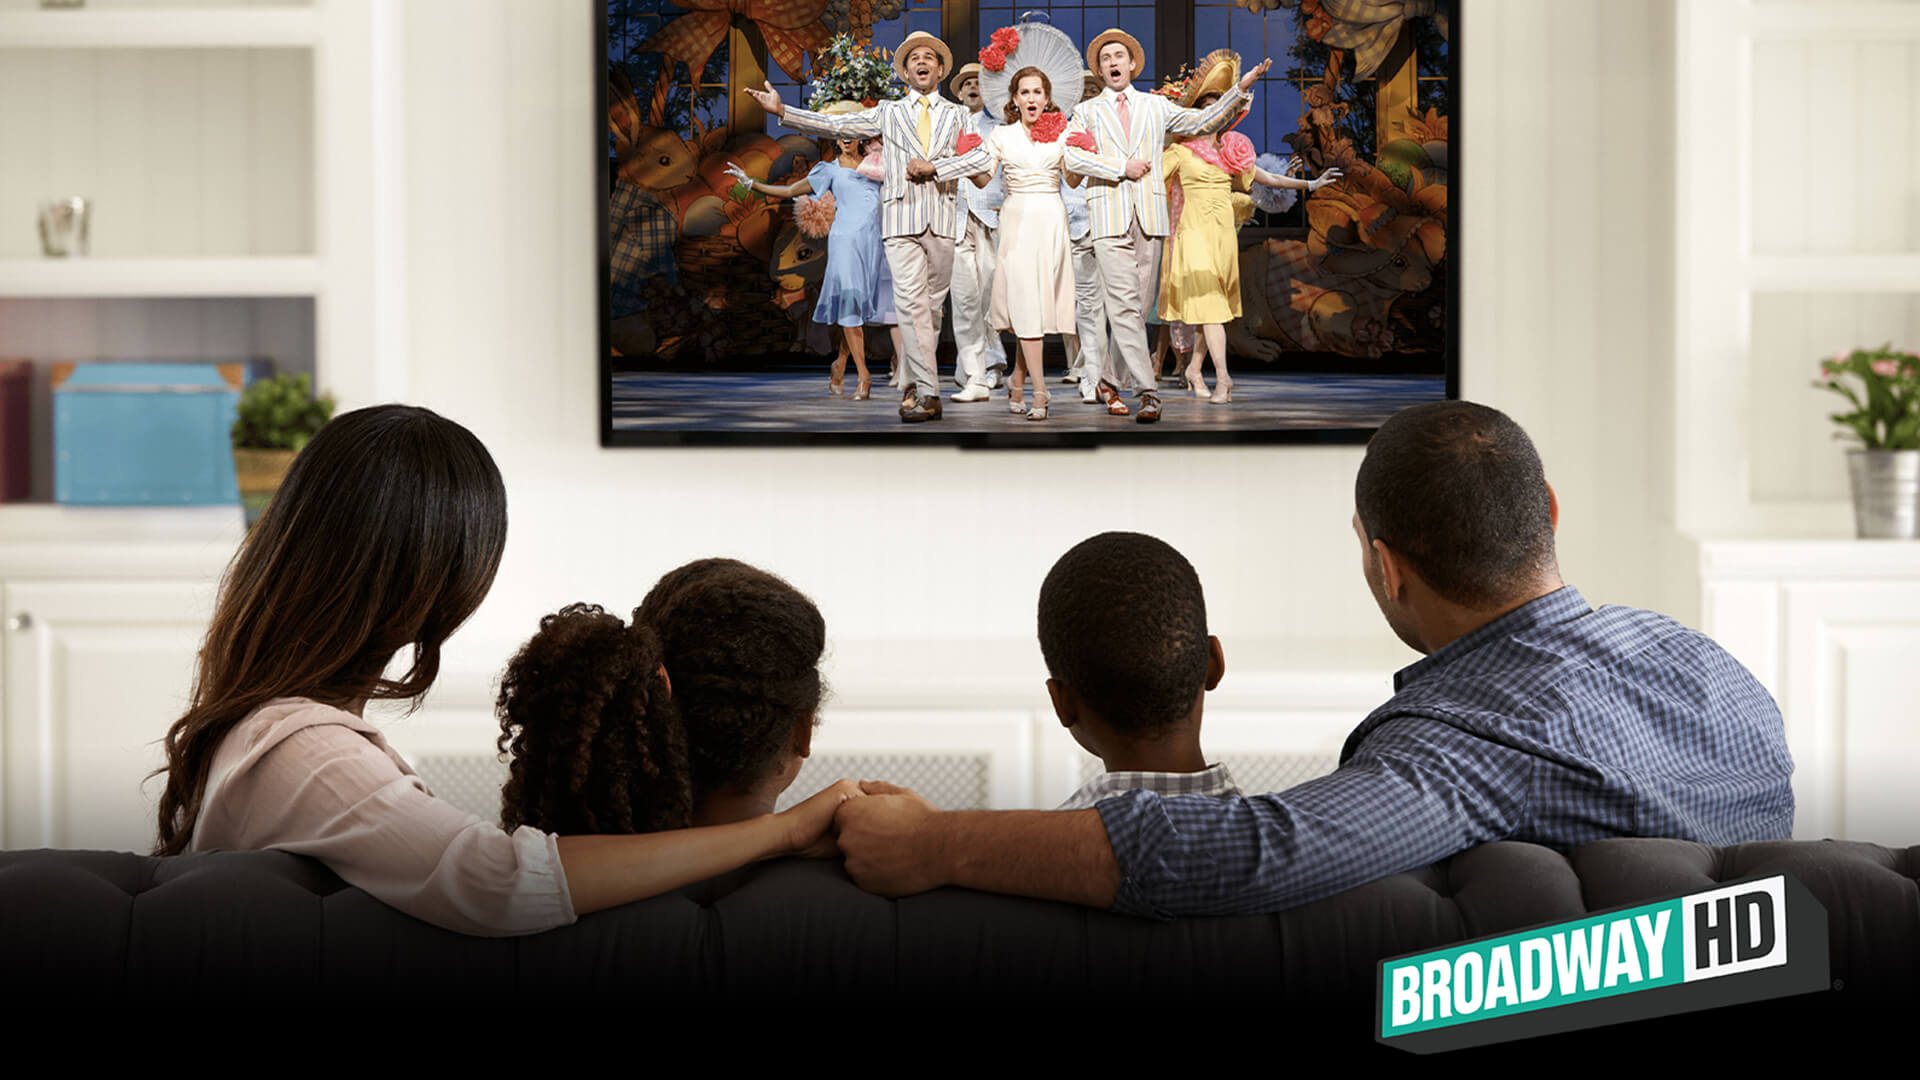 A family watching a Broadway musical recording on the television